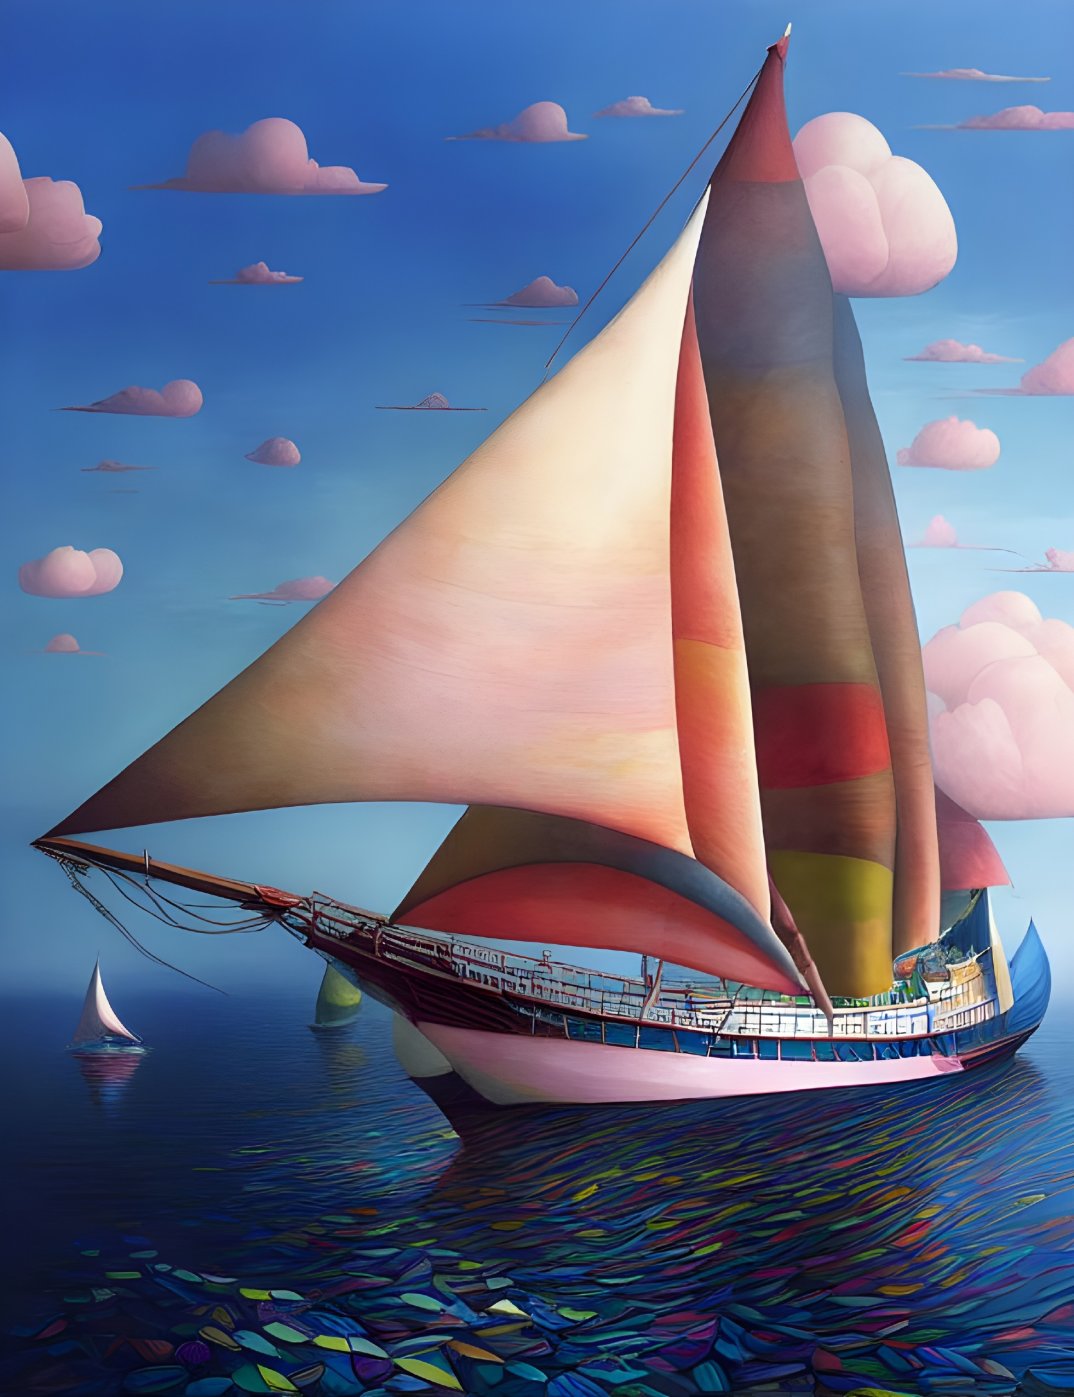 Vibrant surrealistic painting of whimsical sailboat on colorful sea